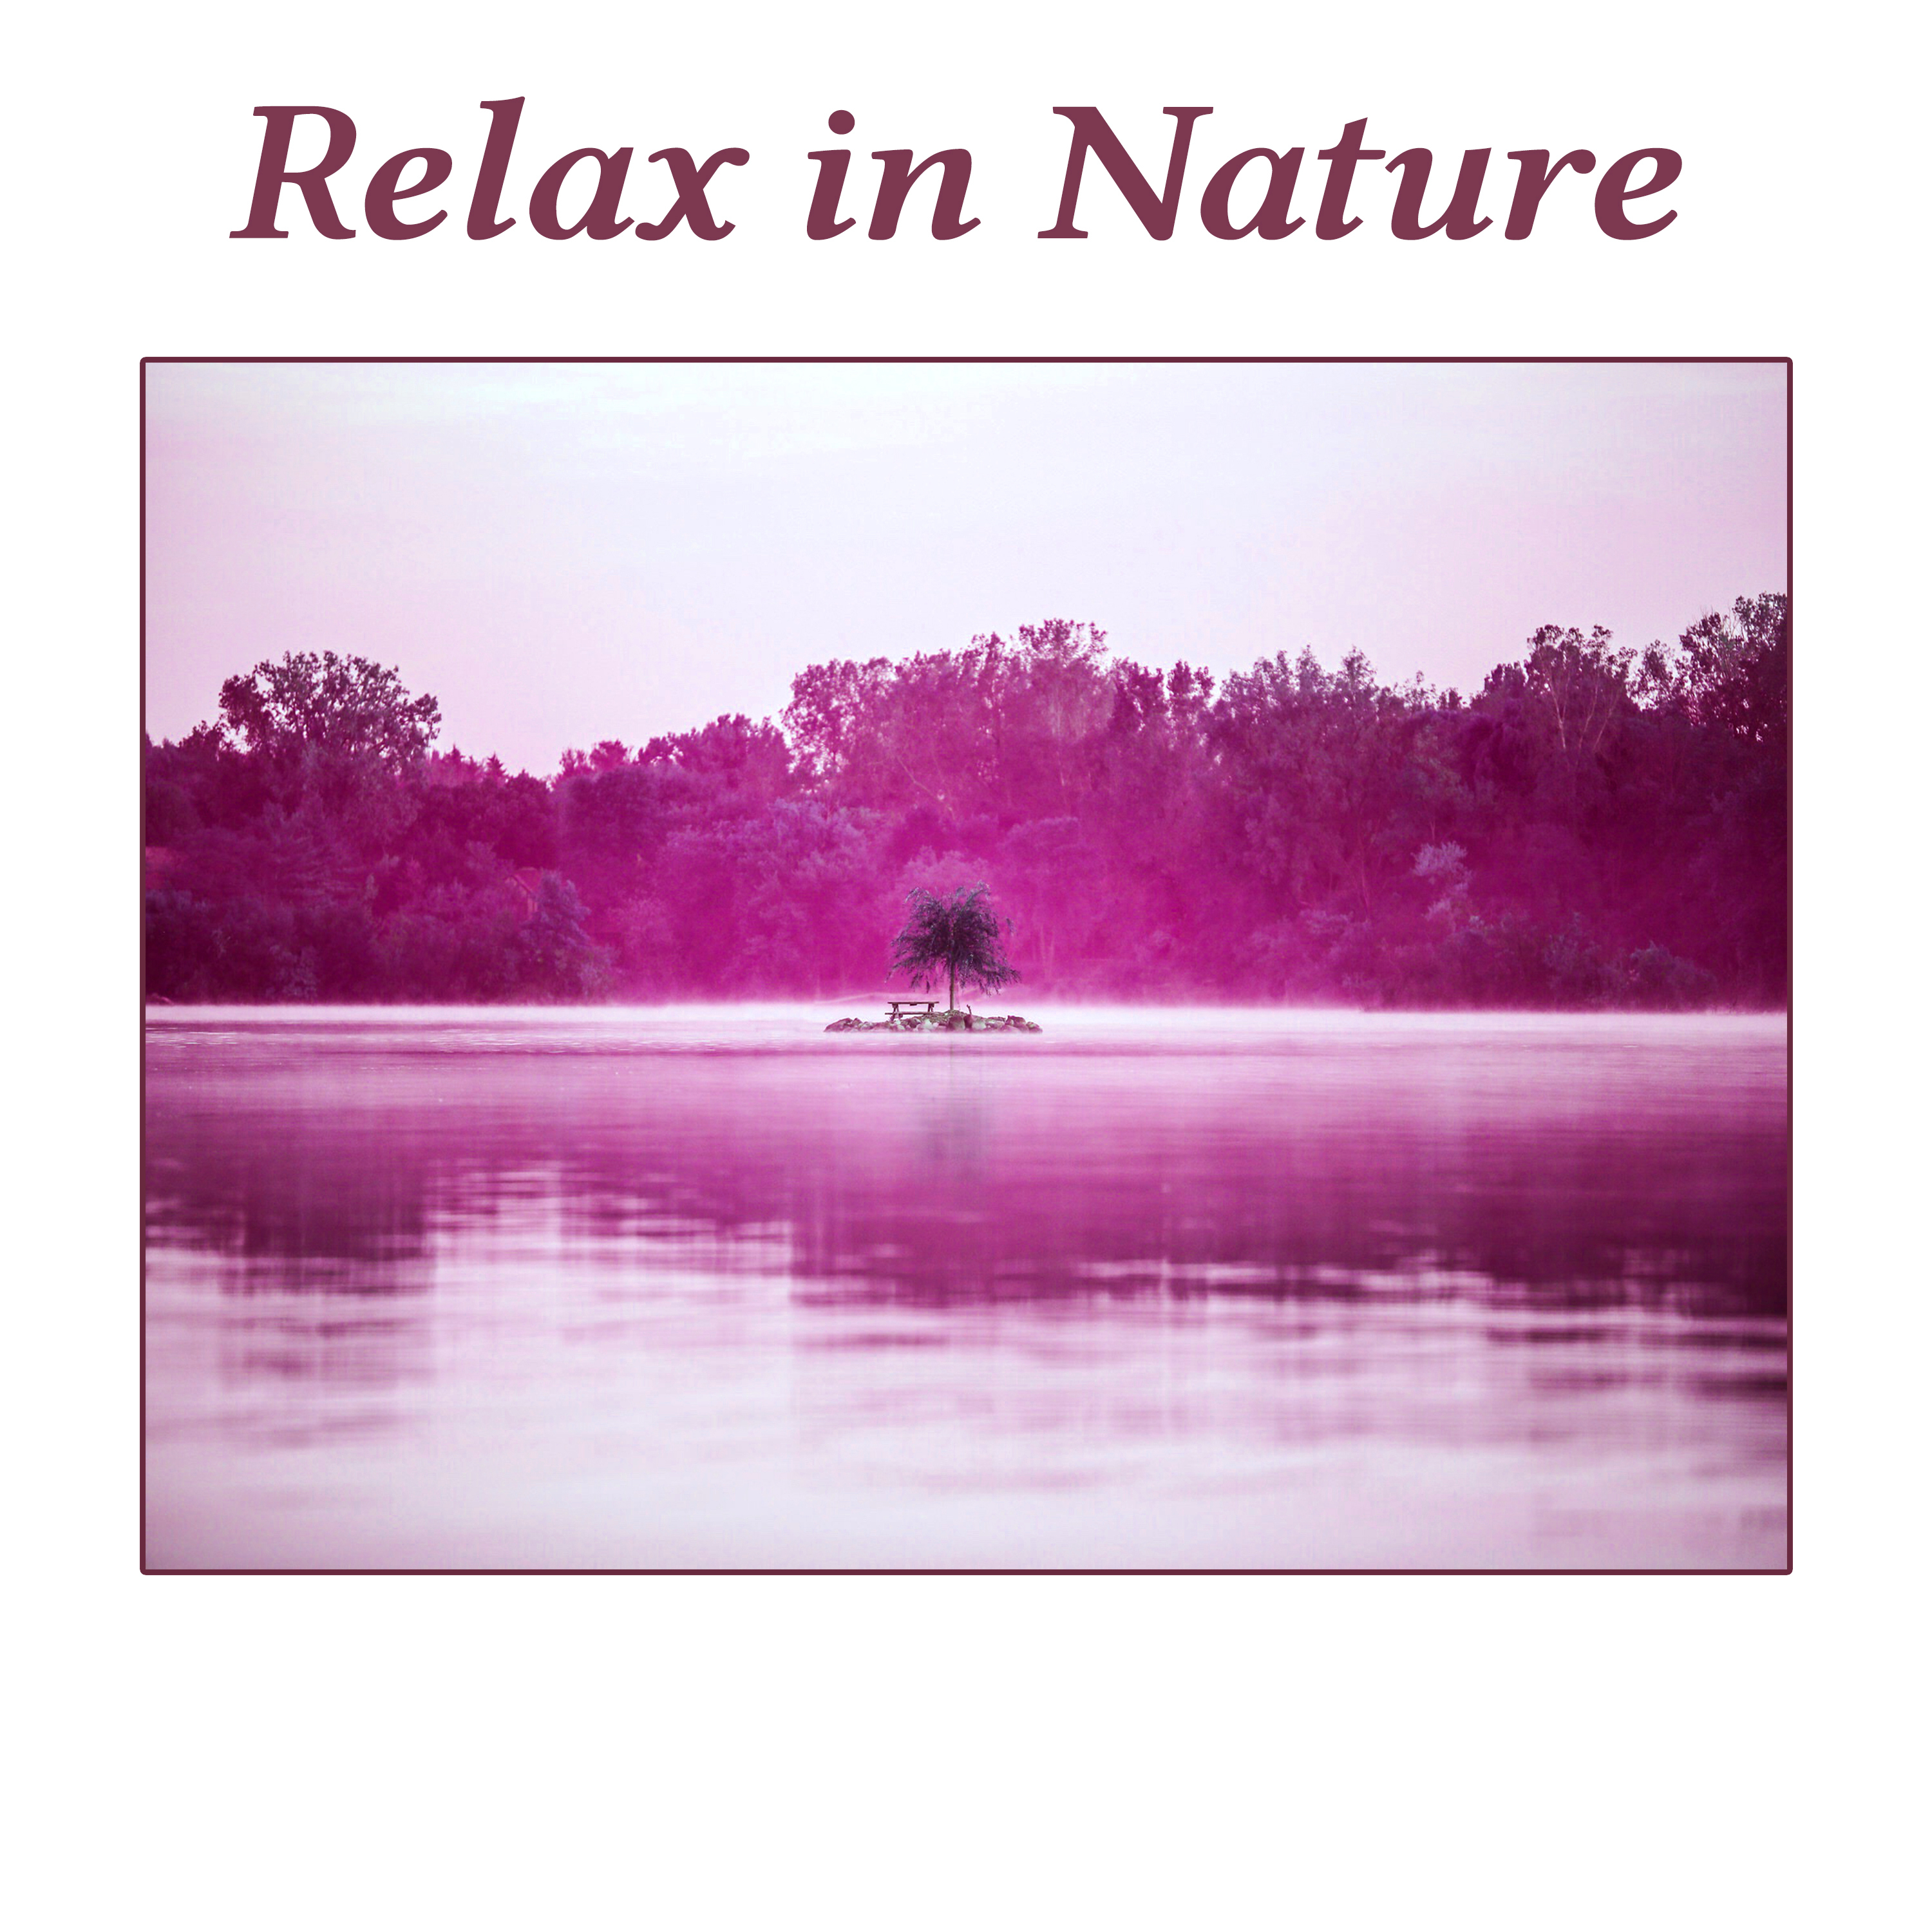 Relax in Nature  Beautiful Nature Sounds of Birds and Ocean Waves, Deep Relaxing Music, Peaceful Sounds of New Age Music for SPA, Wellness